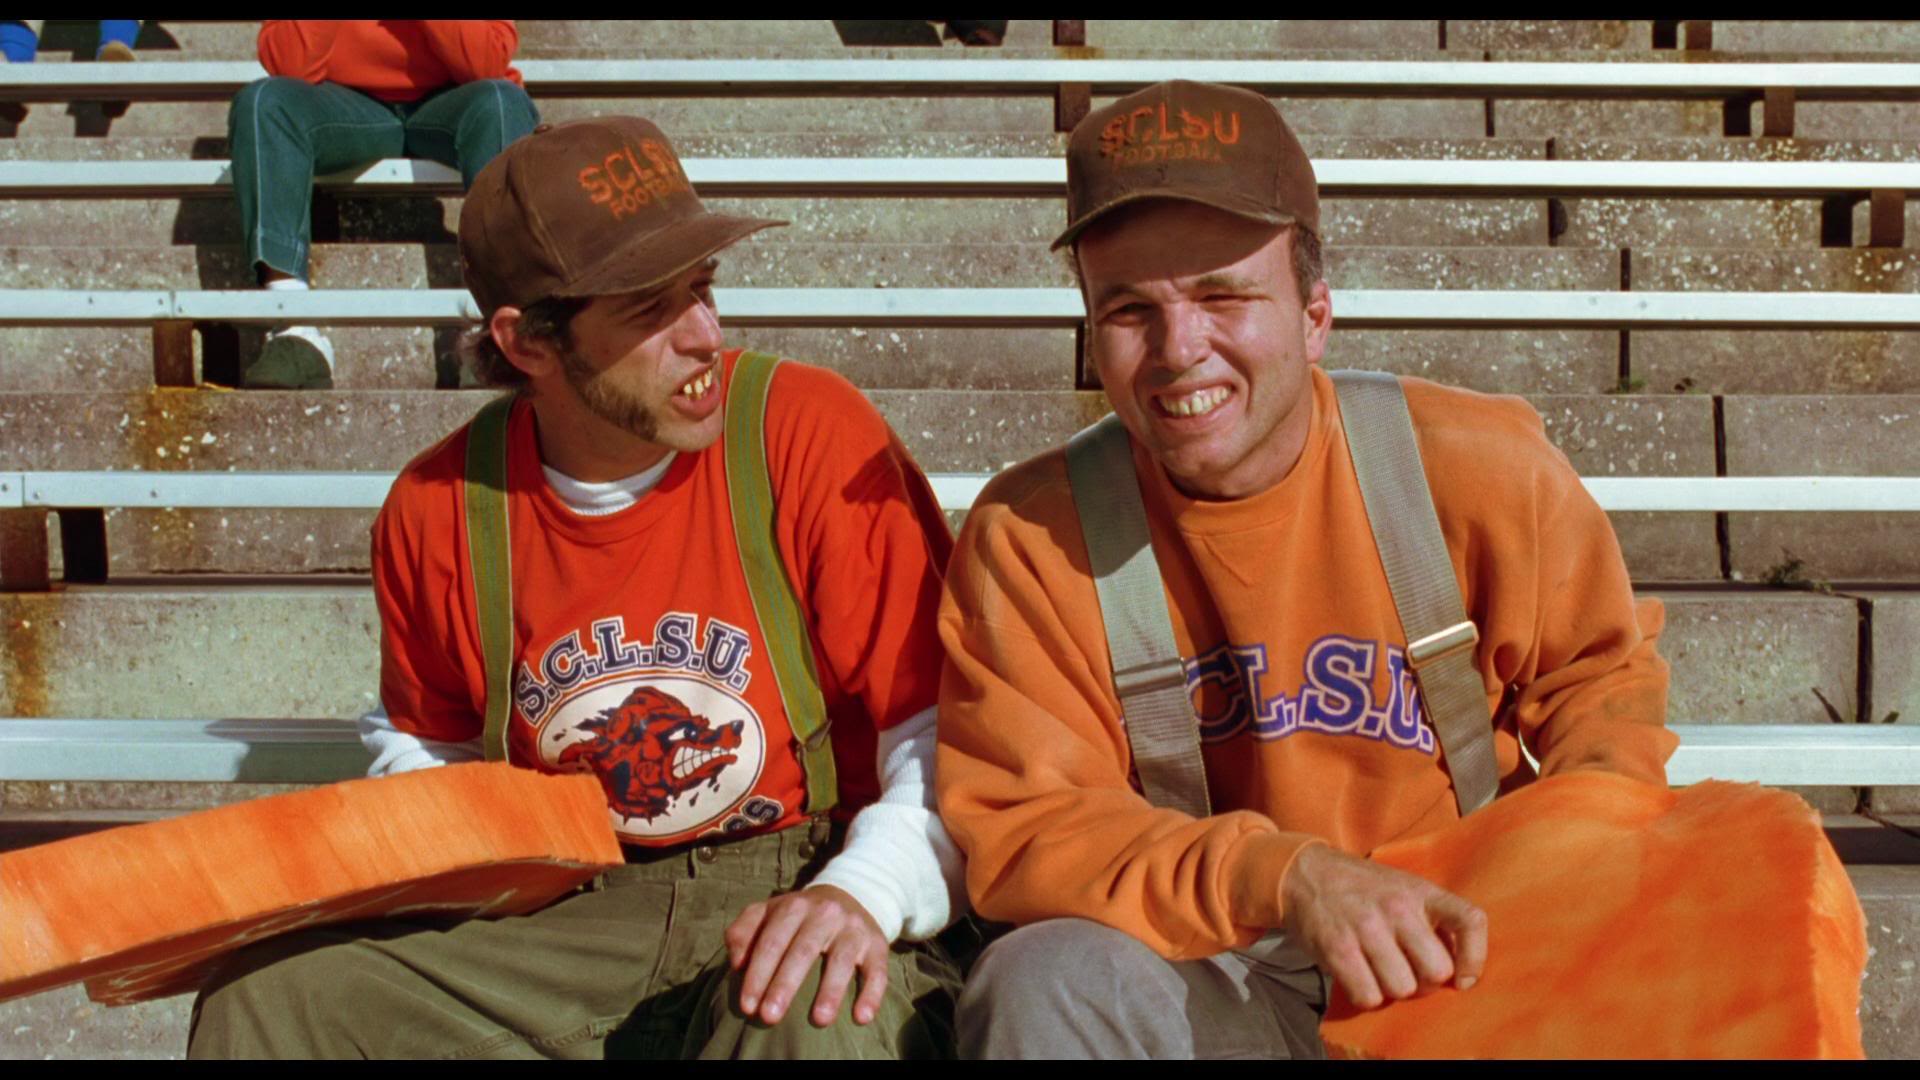 Waterboy Quotes About Football.